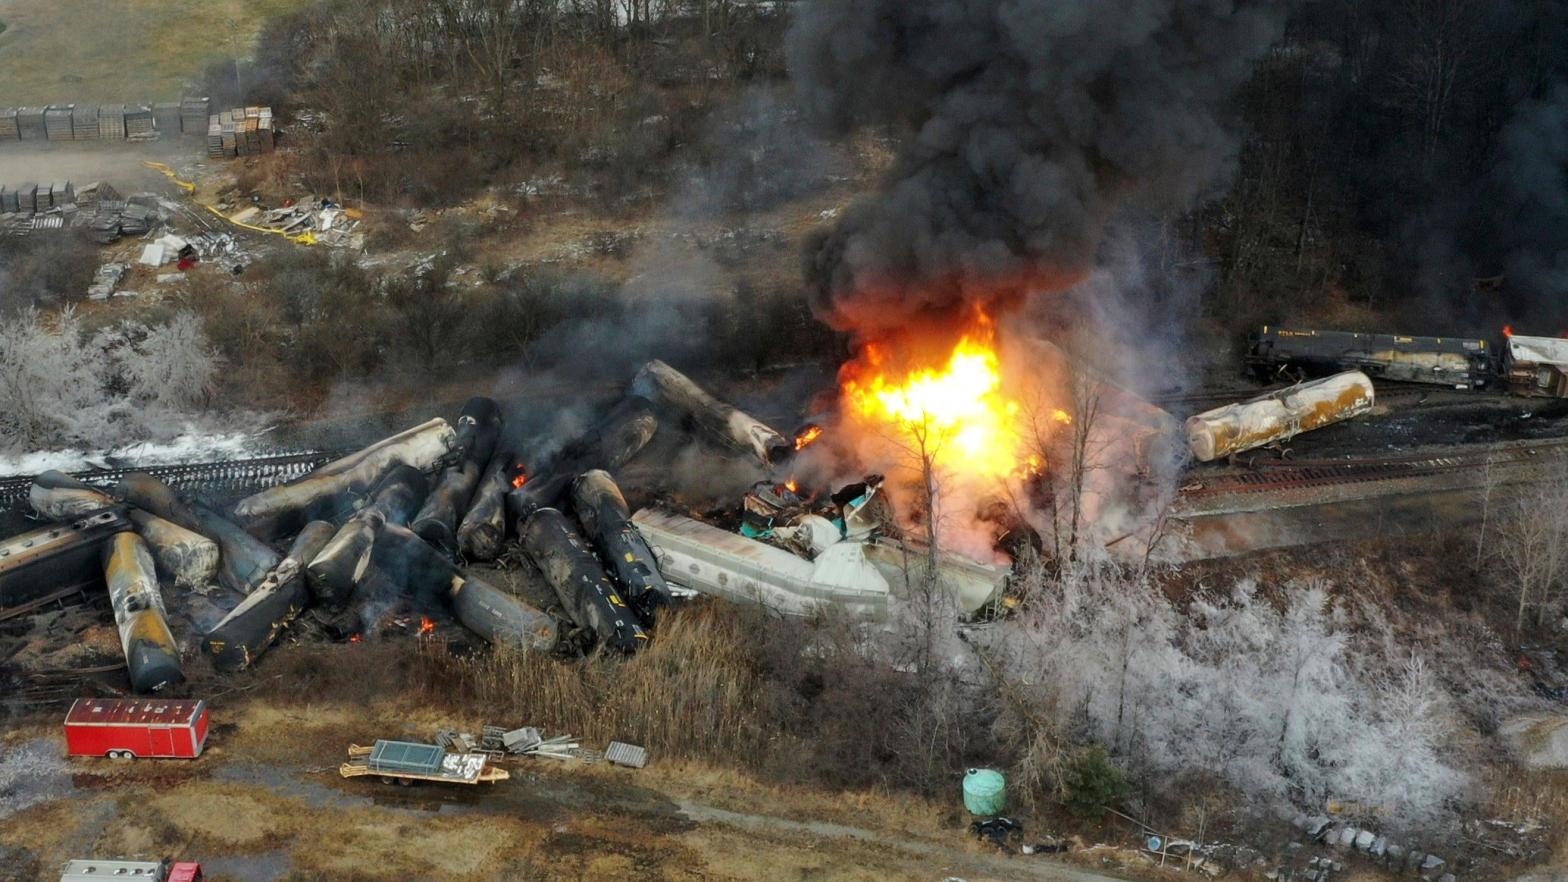 Portions of a Norfolk and Southern freight train that derailed this Feb. 3, still on fire at mid-day Saturday, Feb. 4, 2023. (Photo: Gene J. Puskar, AP)